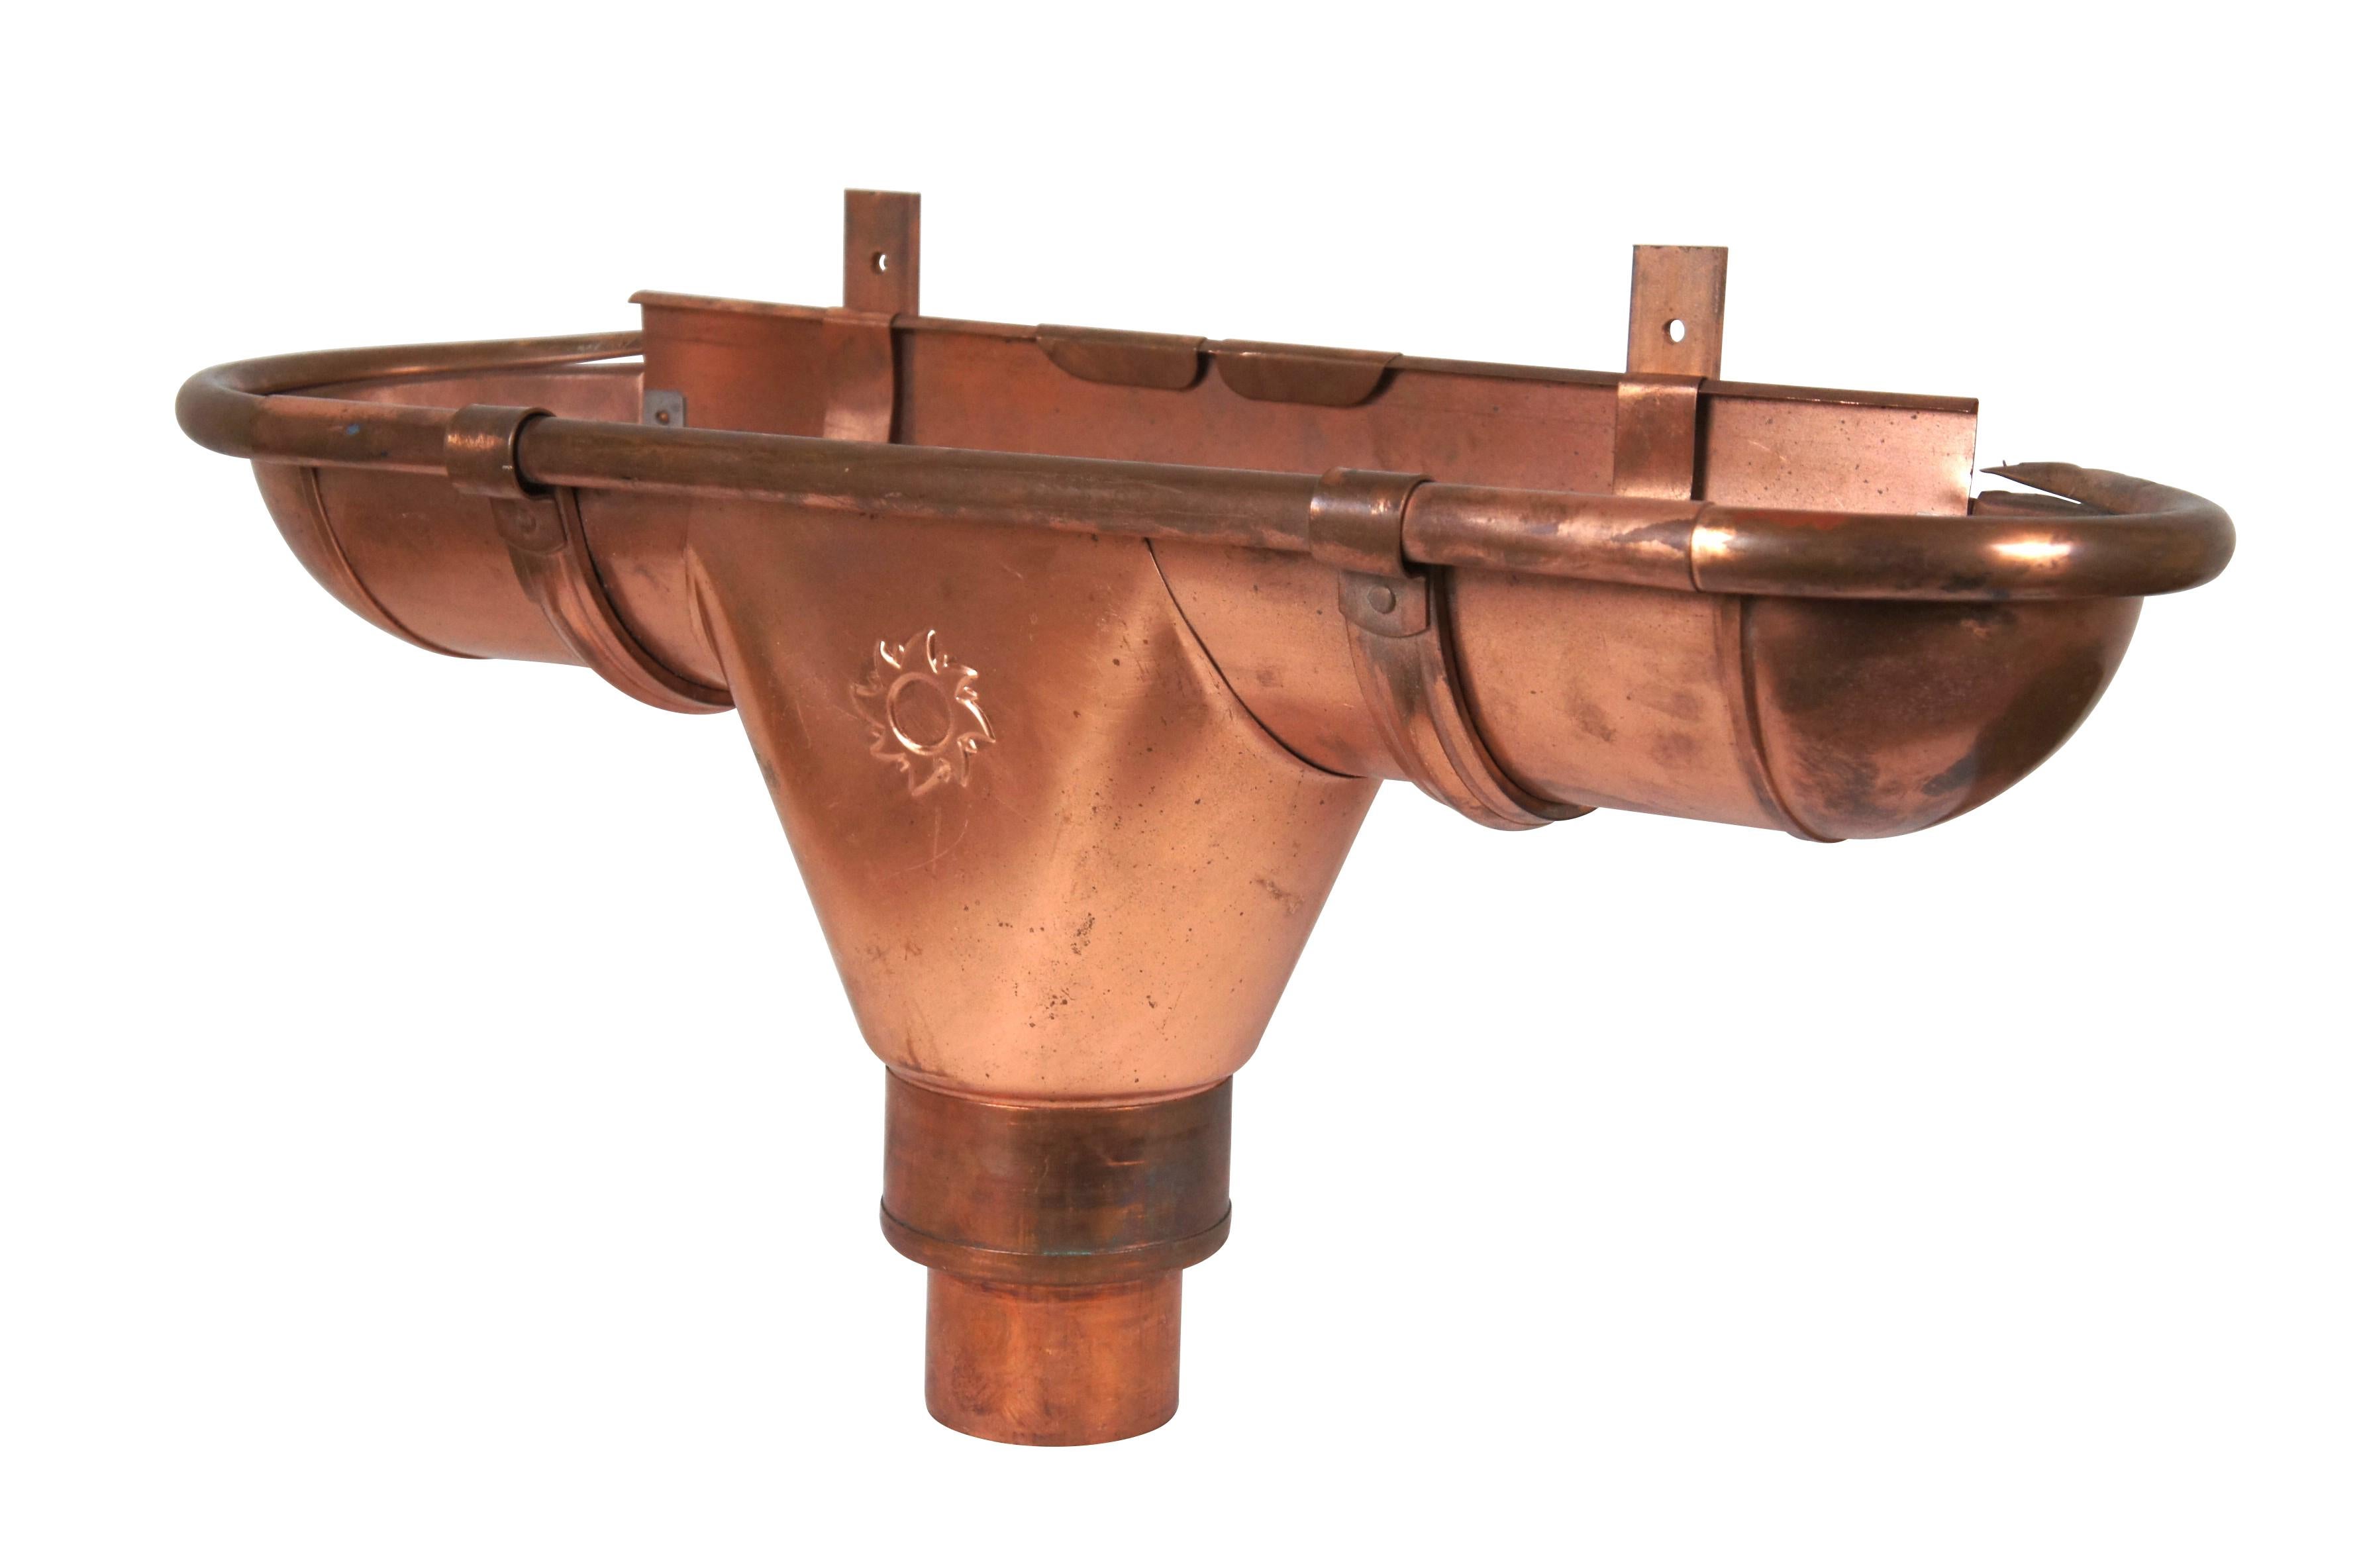 Late 20th century Minoletti copper downspout gutter segment, outlet embossed with a sun, and half-spherical end caps. Includes base connector and one support bracket. Numbered 330/100.

Dimensions:
25